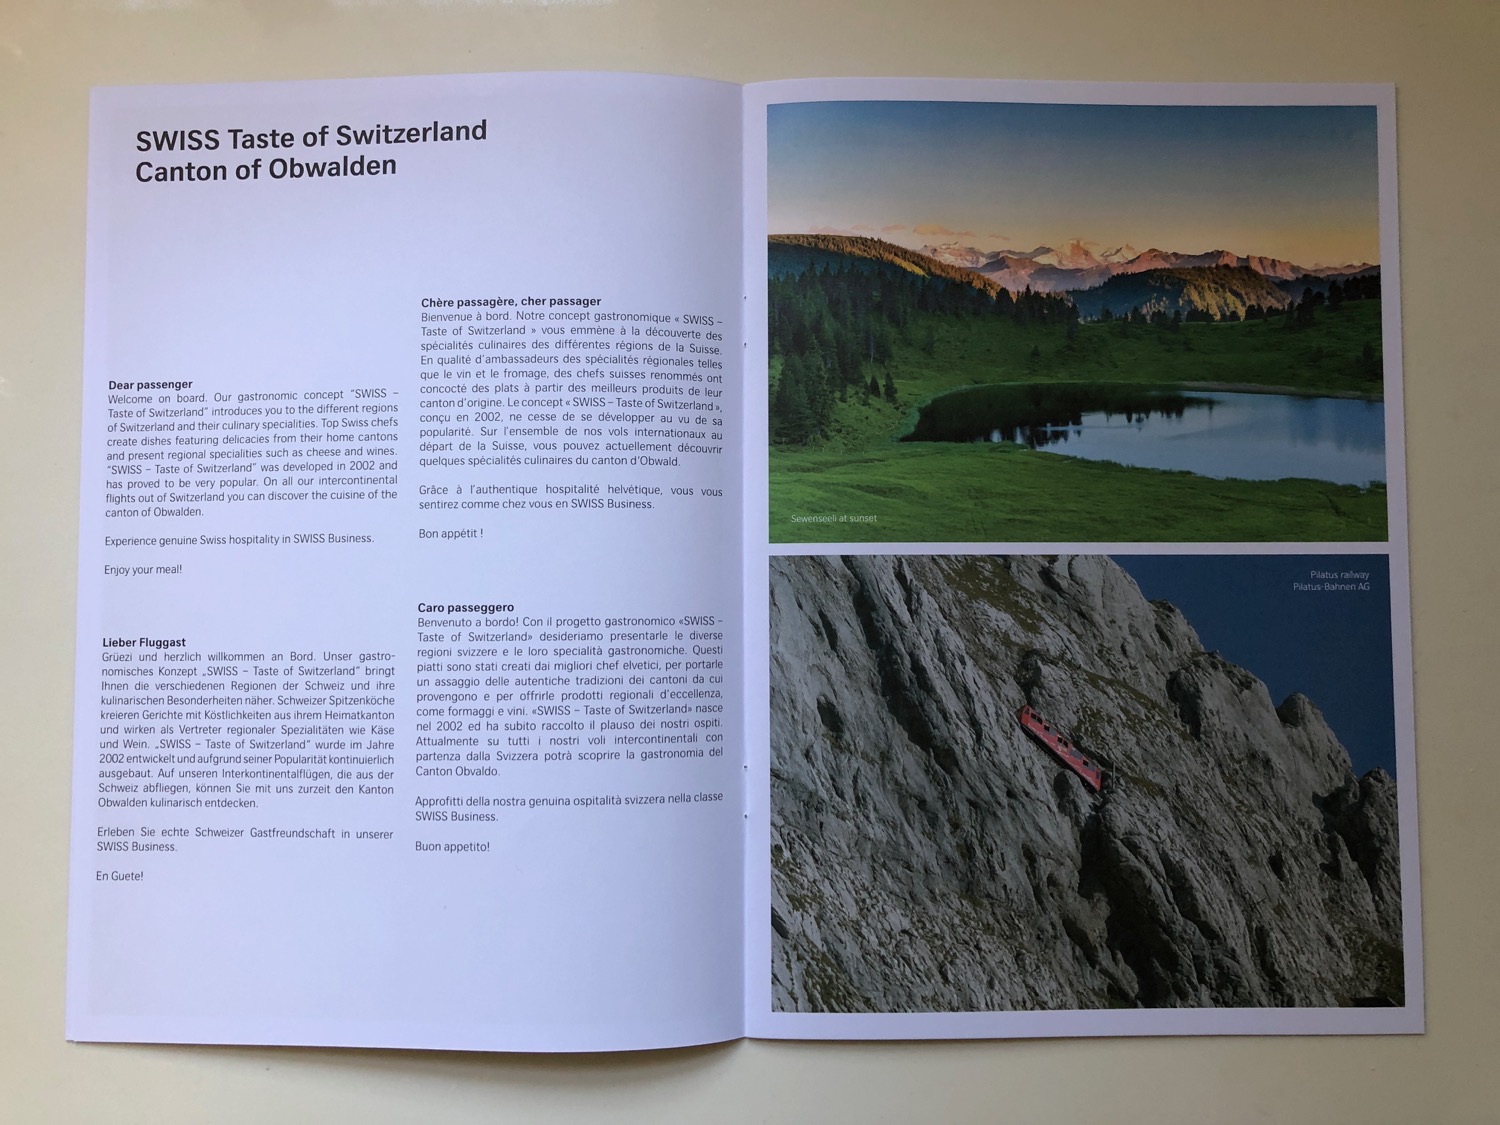 a book with pictures of mountains and trees